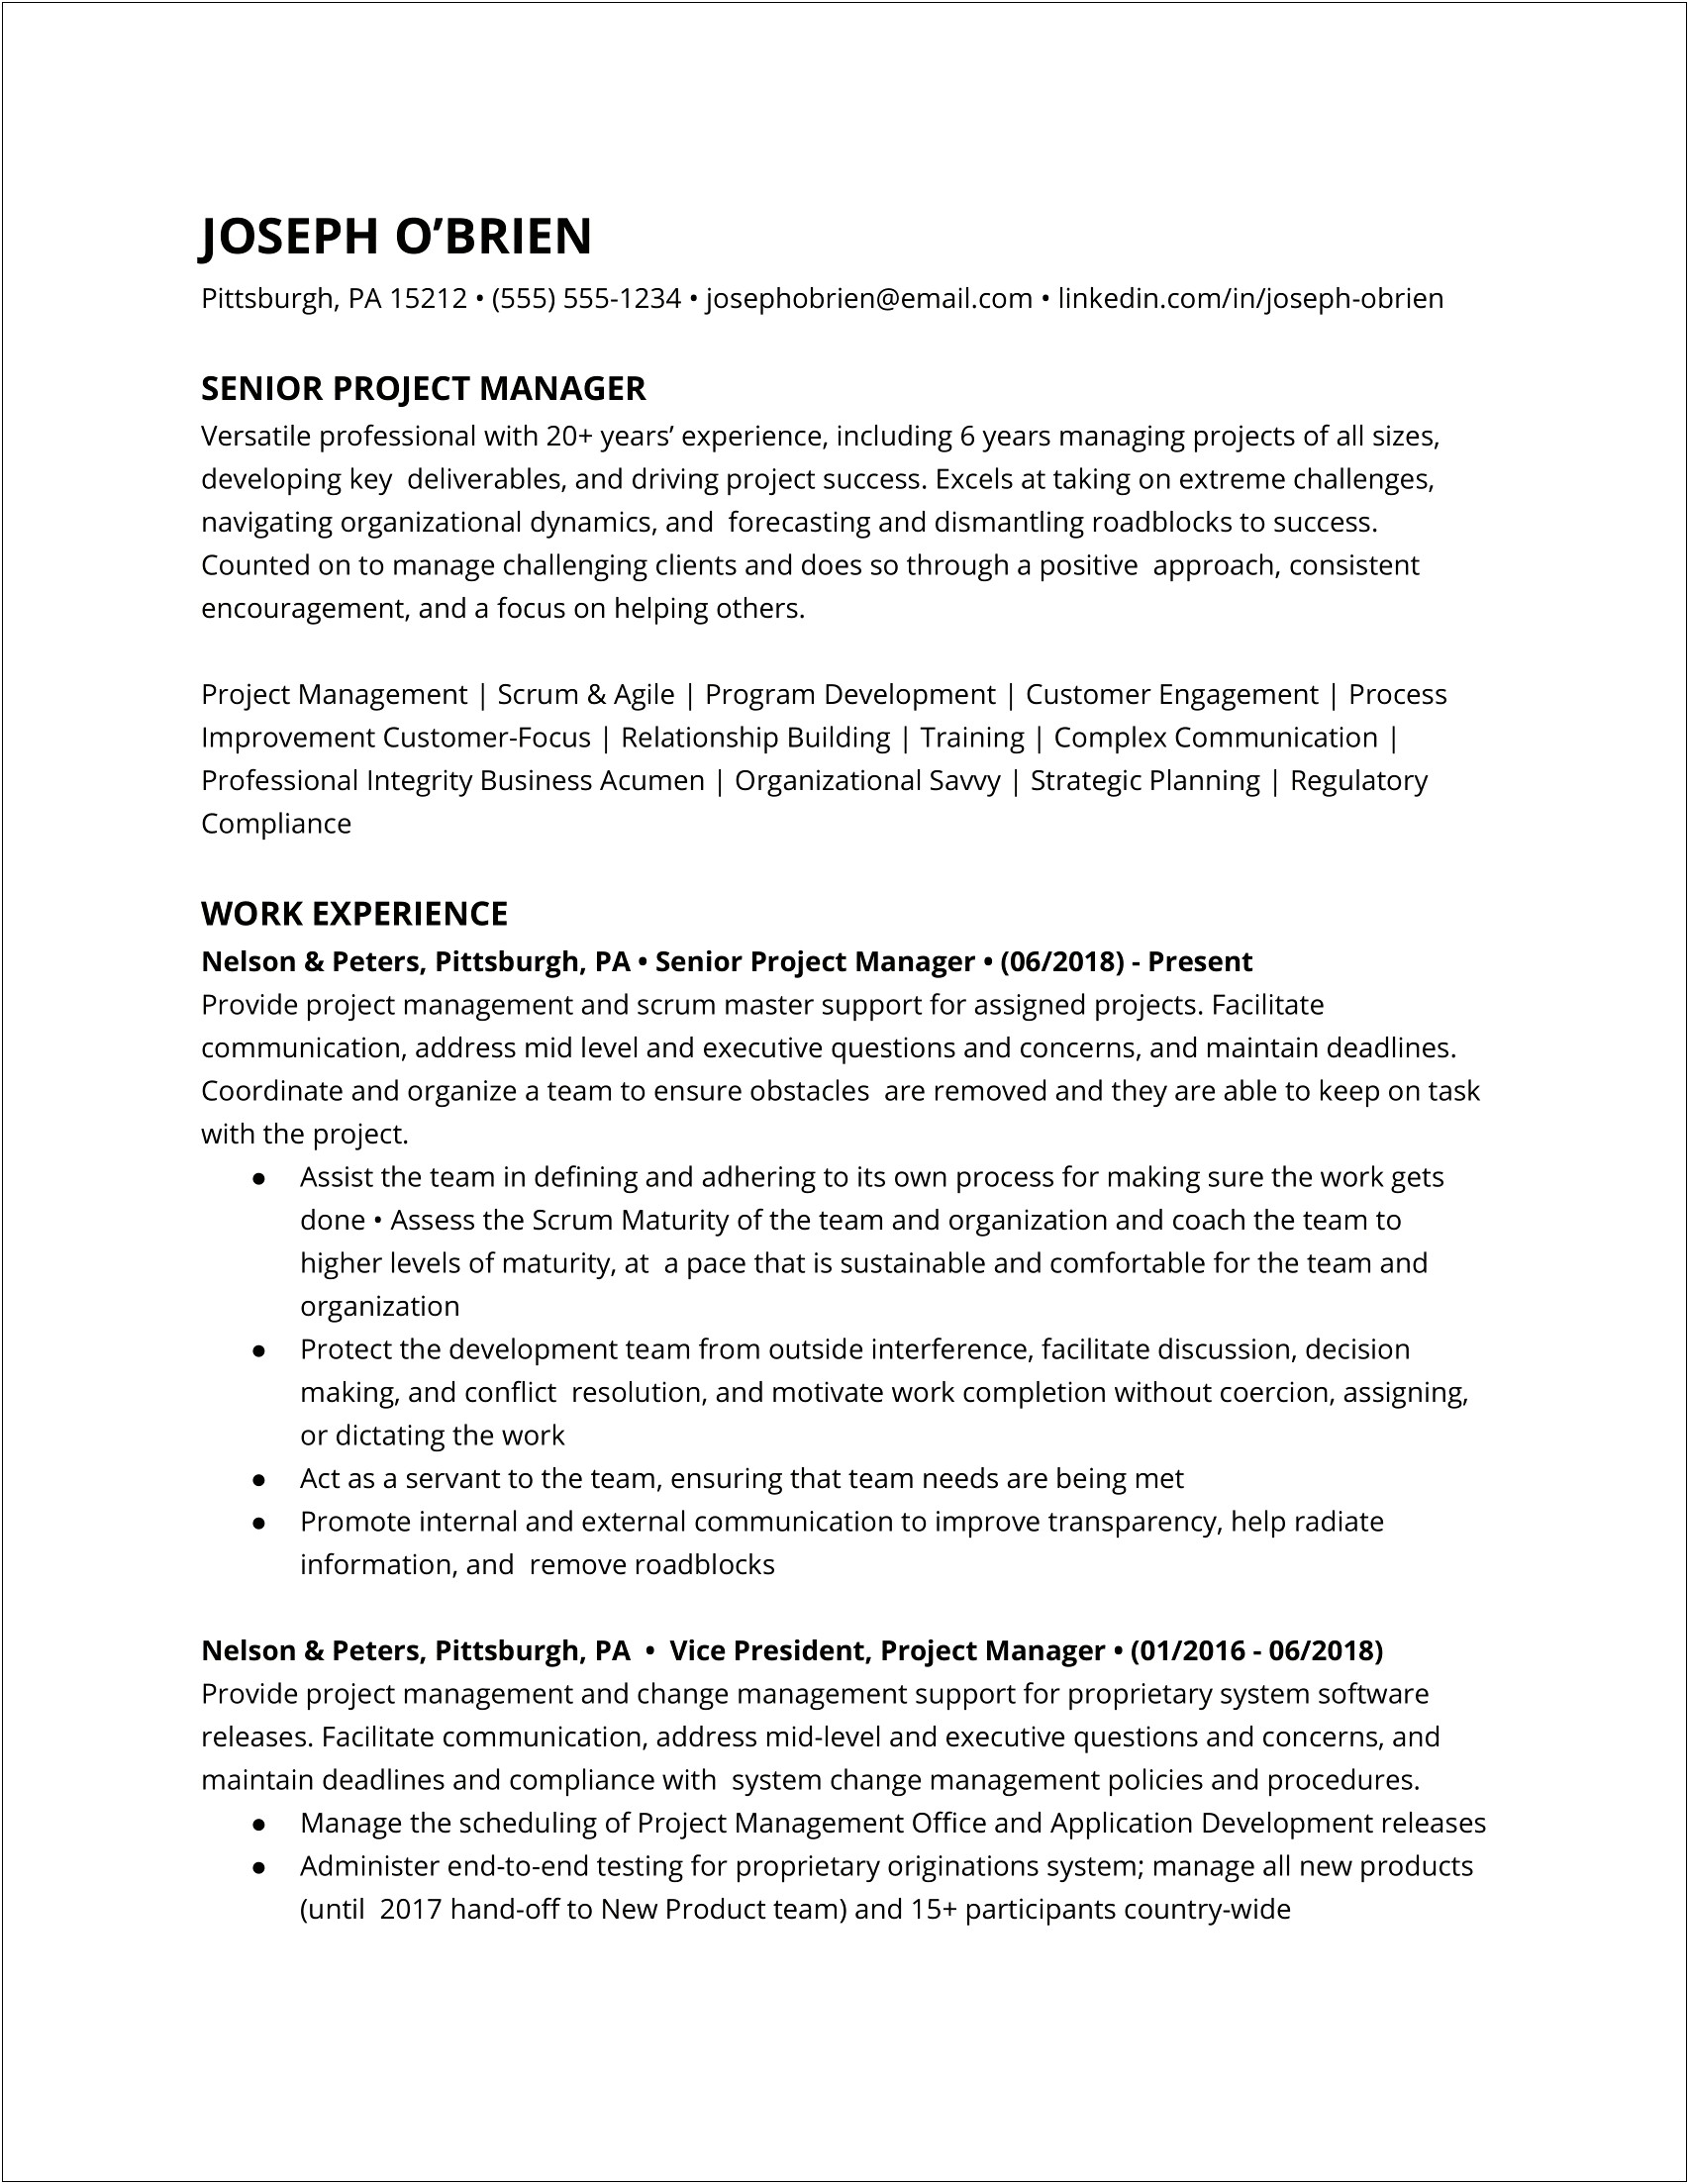 Resume Of Sales Manager In Construction